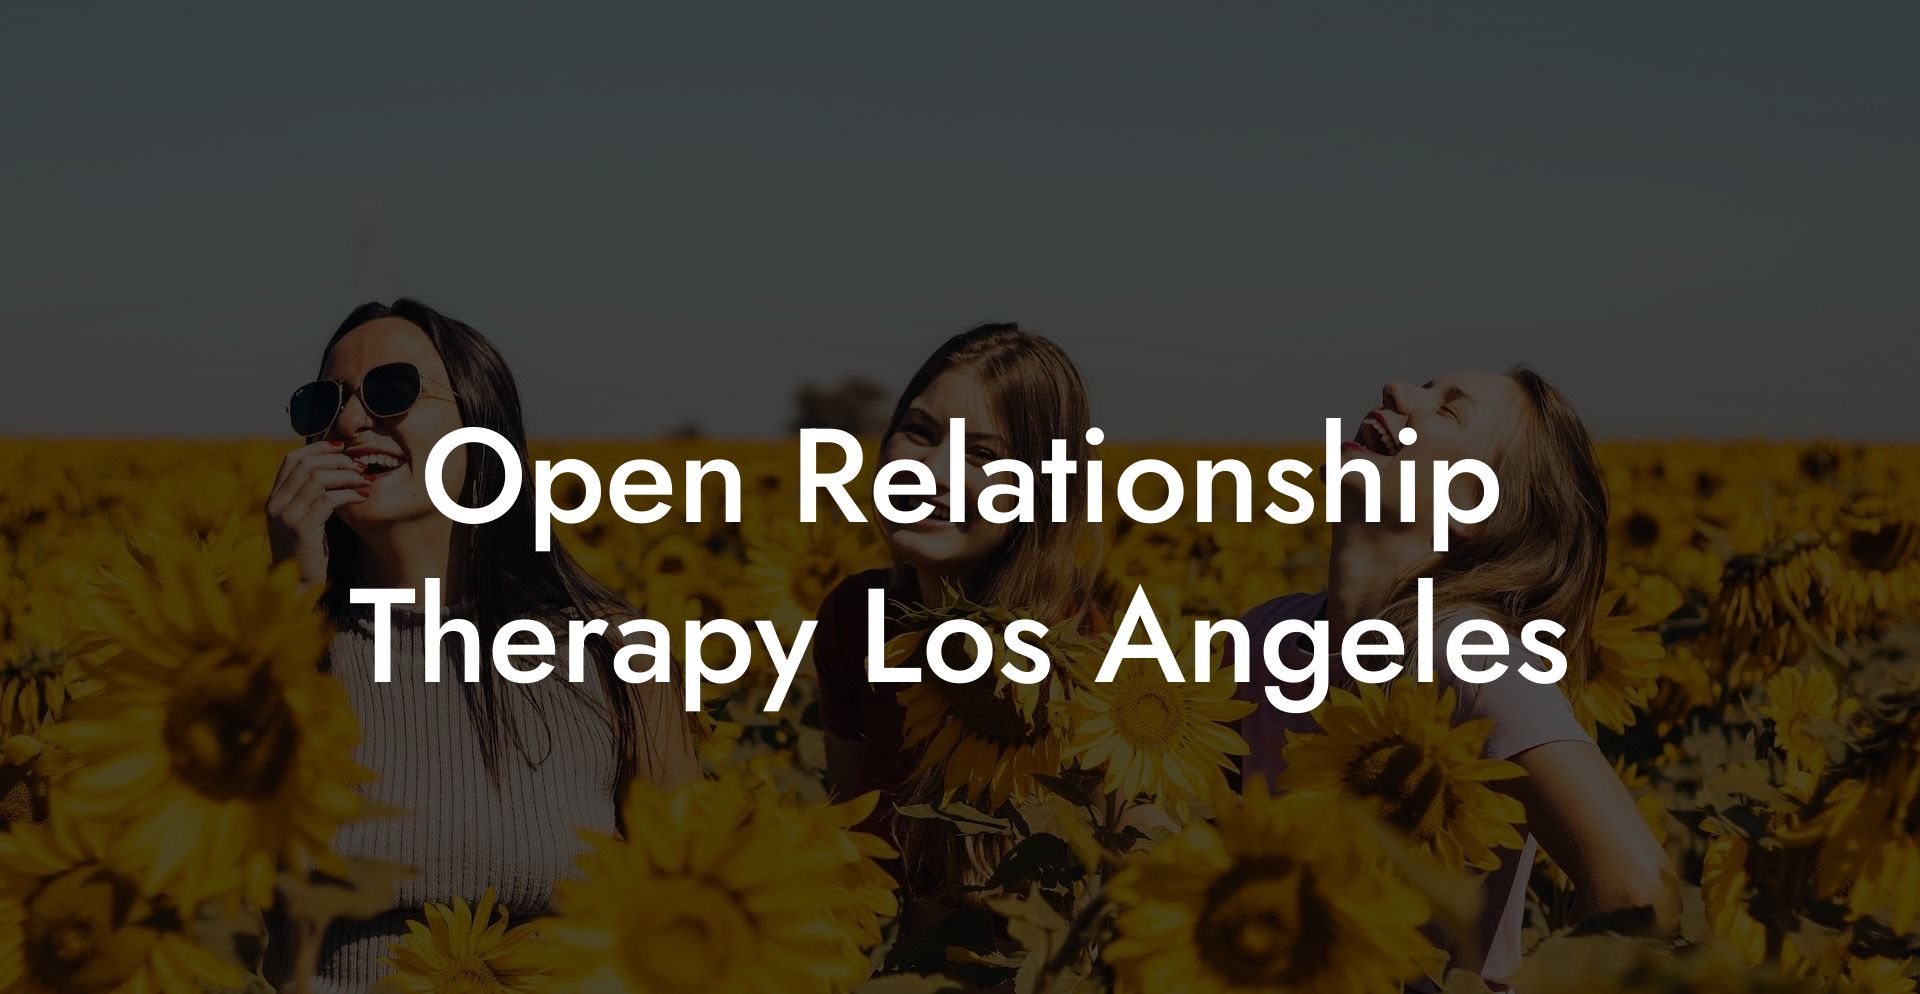 Open Relationship Therapy Los Angeles